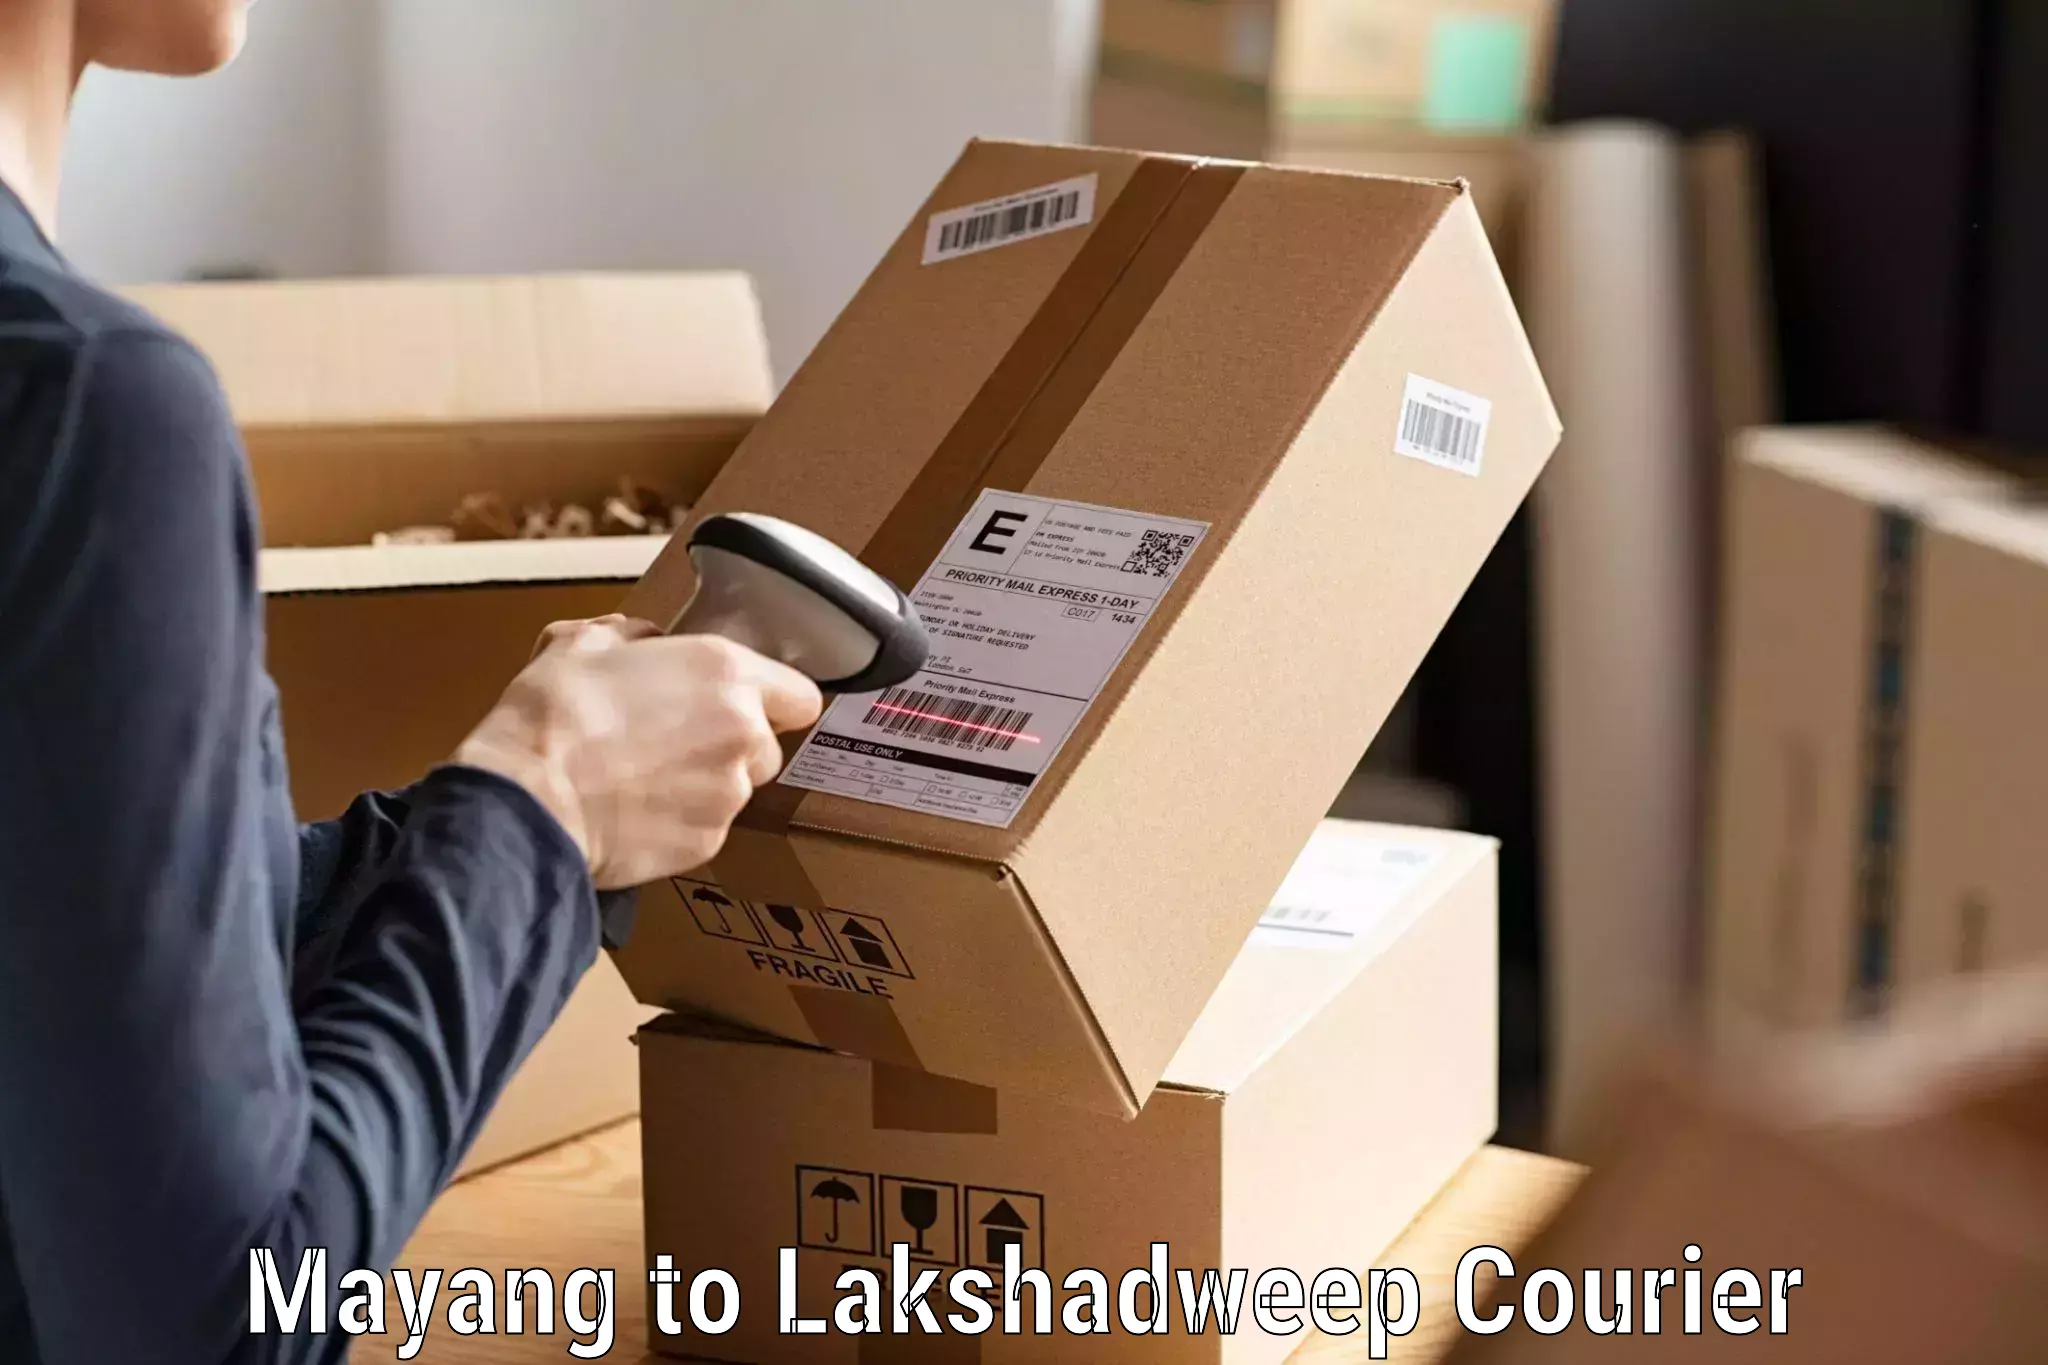 Sustainable courier practices Mayang to Lakshadweep